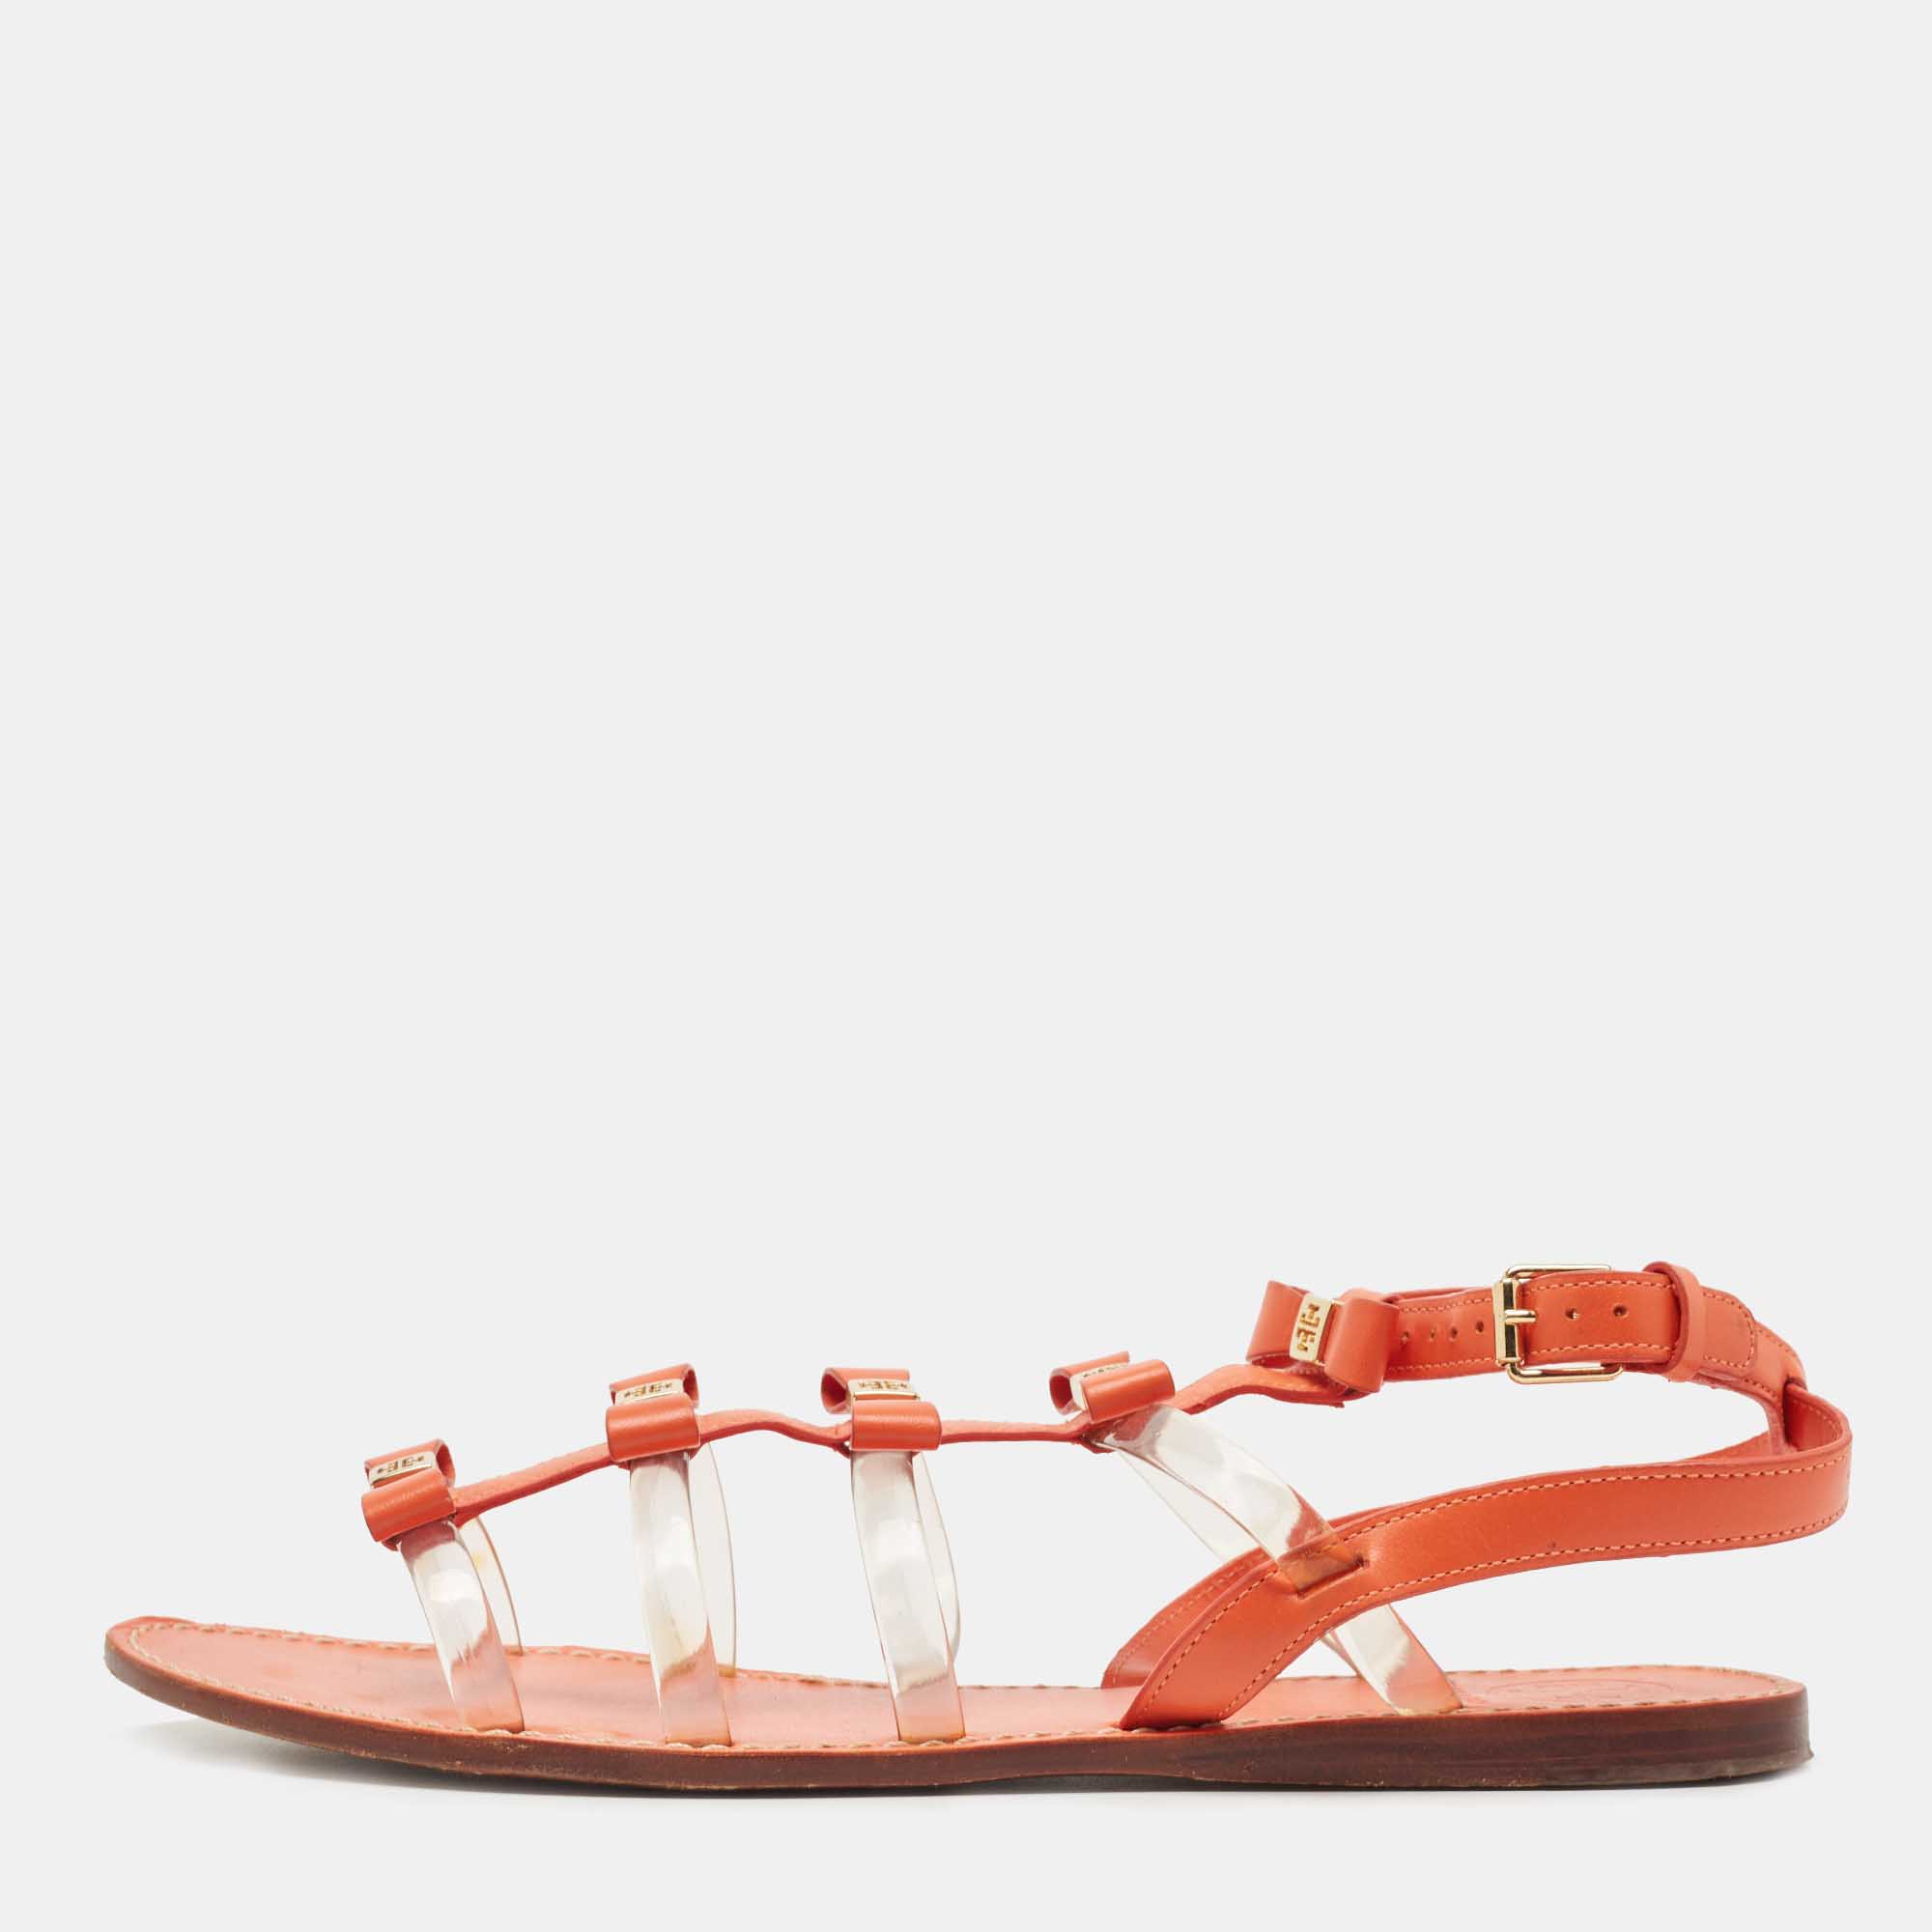 Pre-owned Tory Burch Orange Leather And Pvc Kira Bow Flat Sandals Size 41.5